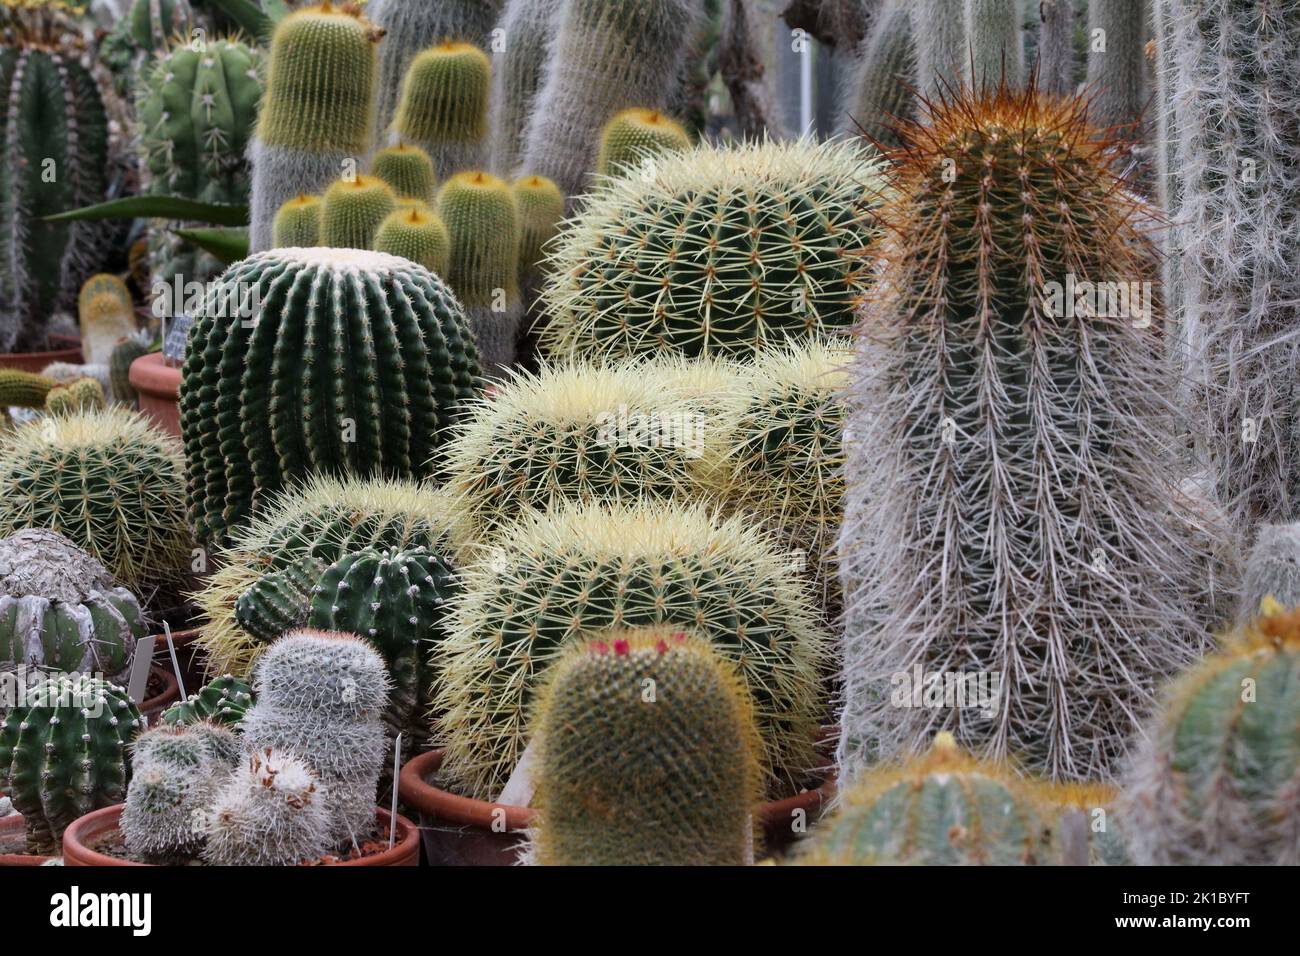 Selection of cactus plants Stock Photo